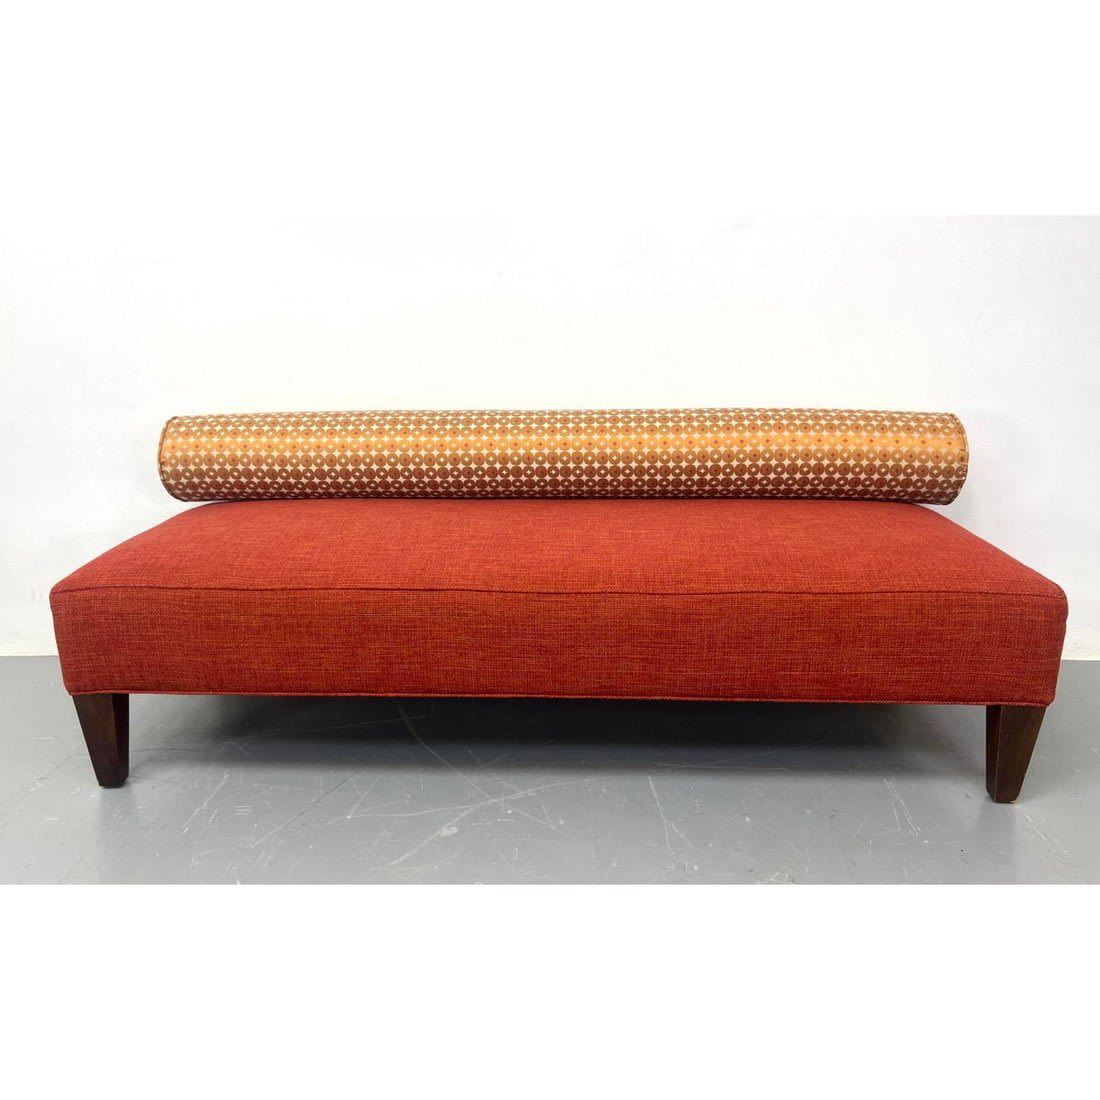 LEE Industries Day Bed Sofa Long 362e60